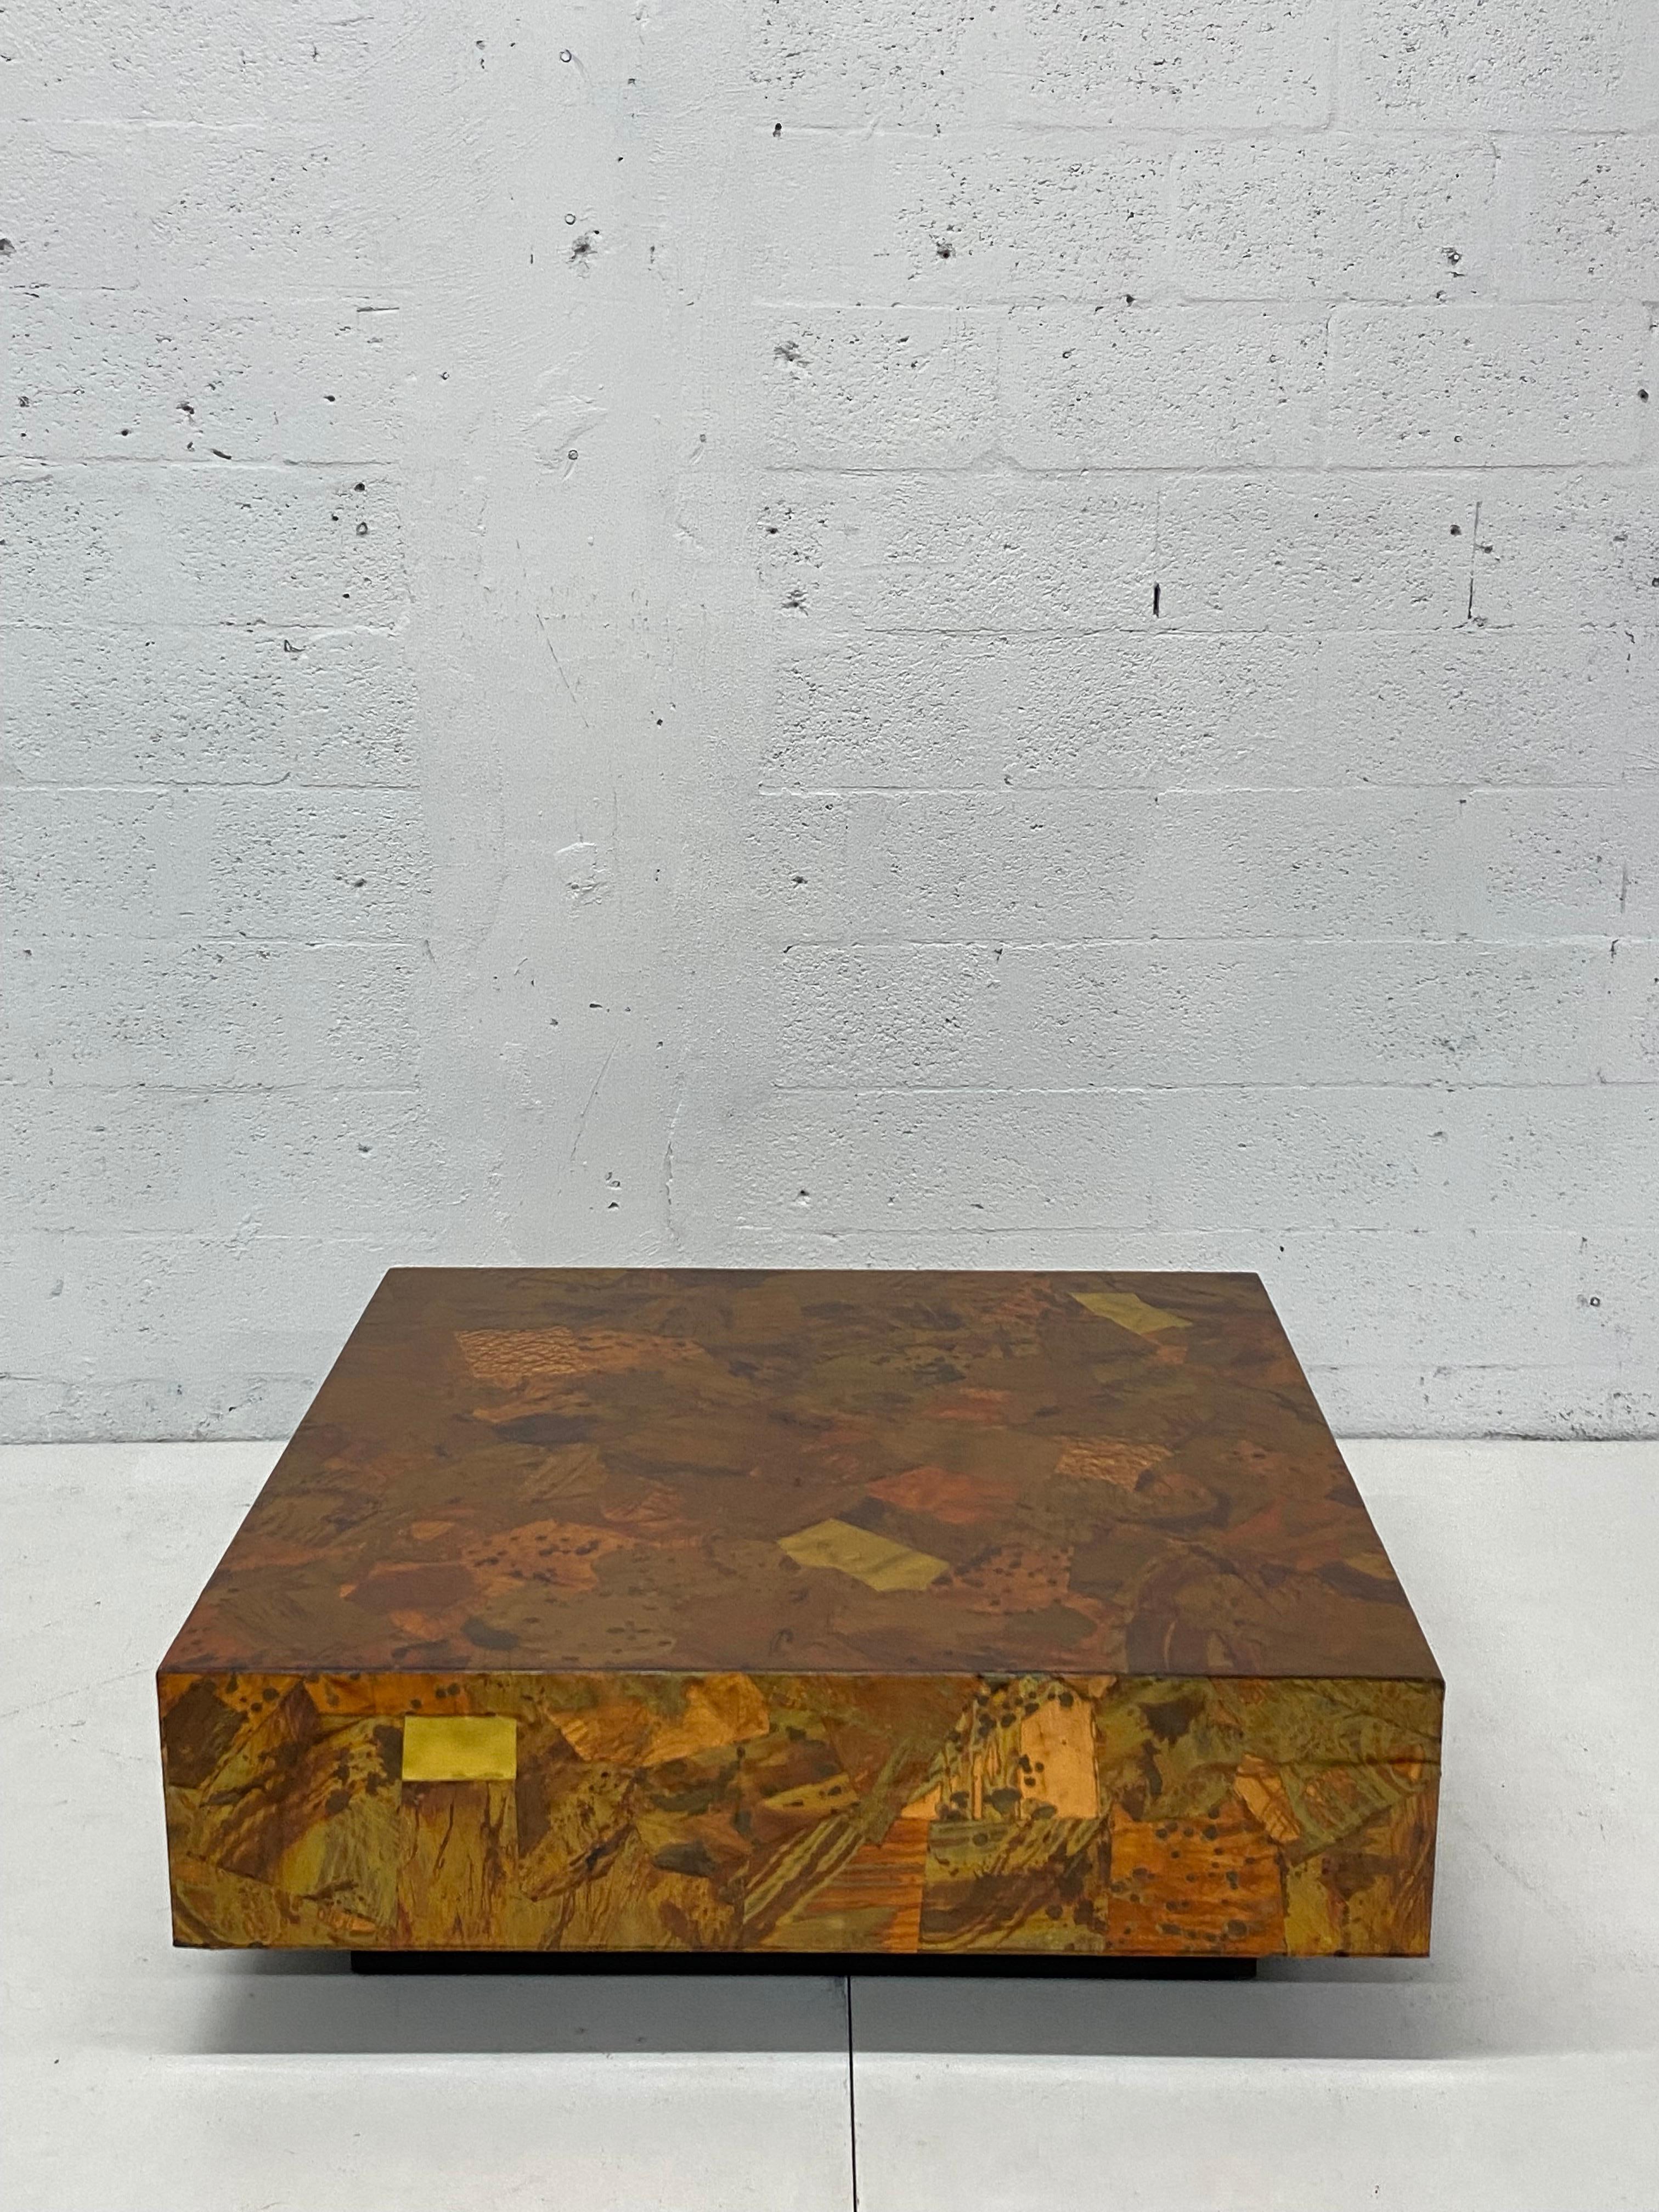 Late 20th Century Mid-Century Modern Patchwork Copper and Brass Coffee Table for Modernage